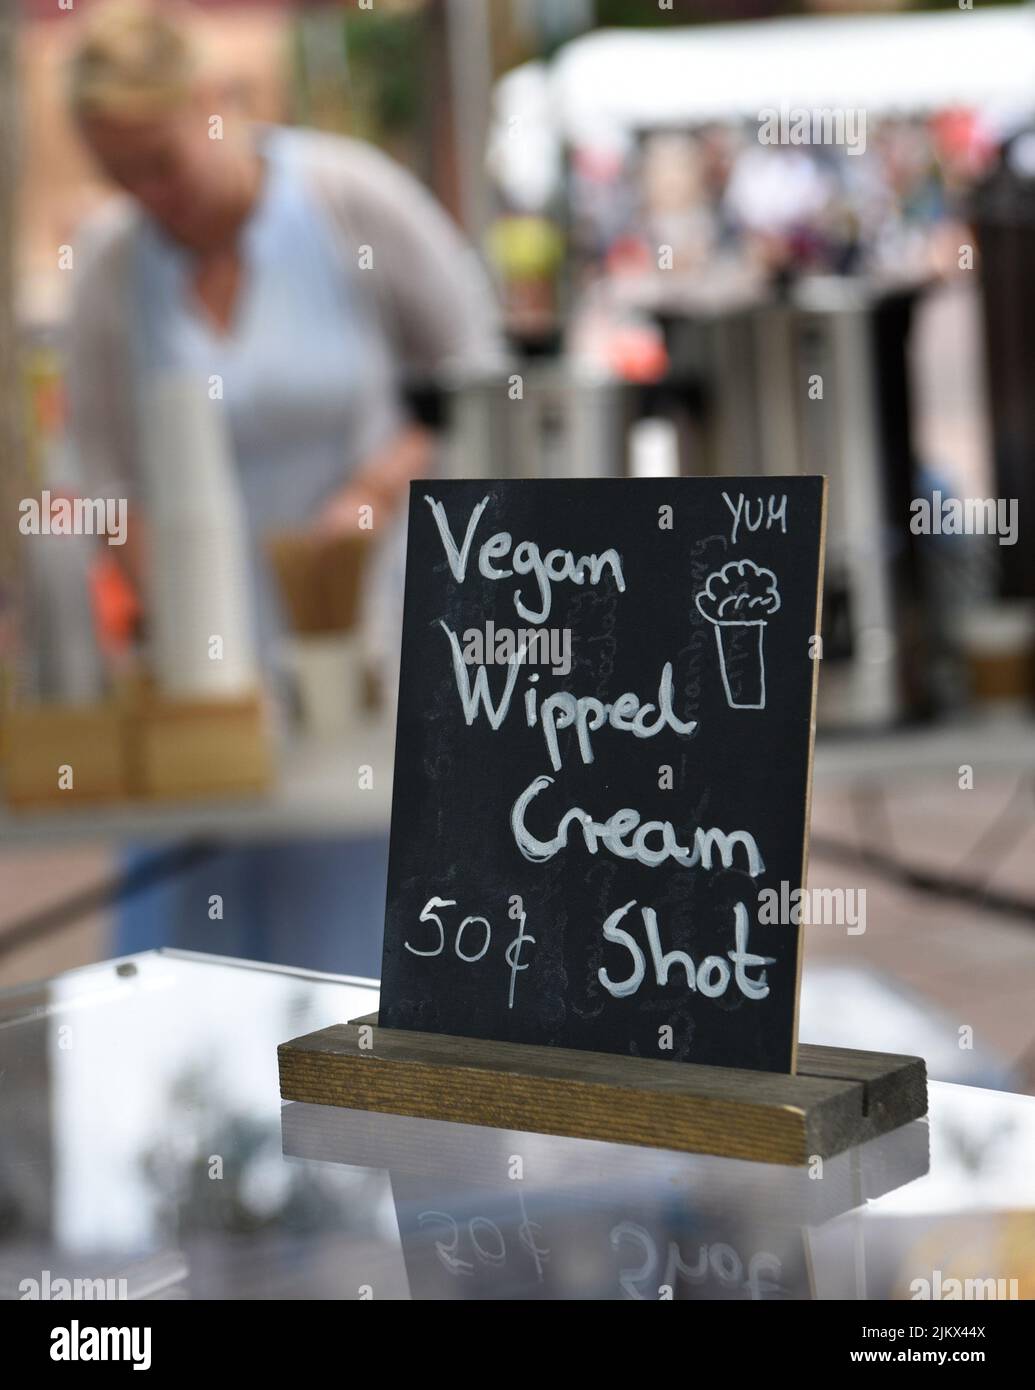 A food vendor offers vegan whipped cream shots on her baked desserts at a festival in Santa Fe, New Mexico. Stock Photo